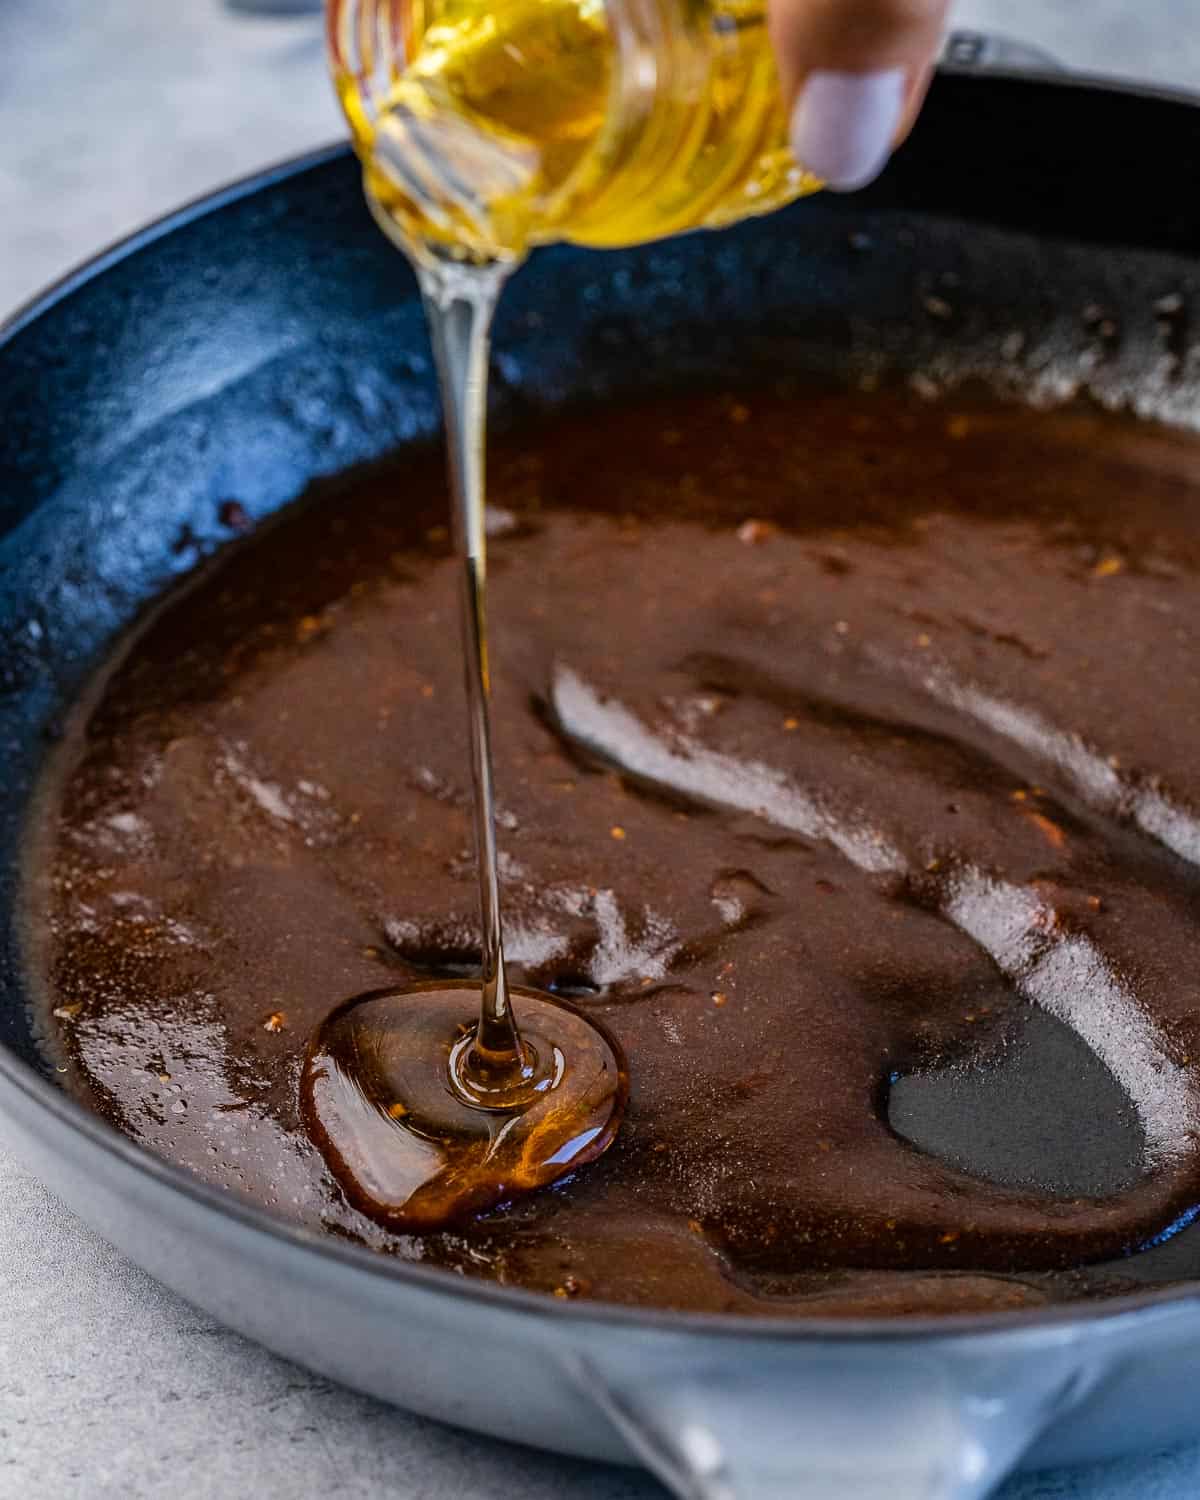 honey is added to make the sauce in a black skillet.